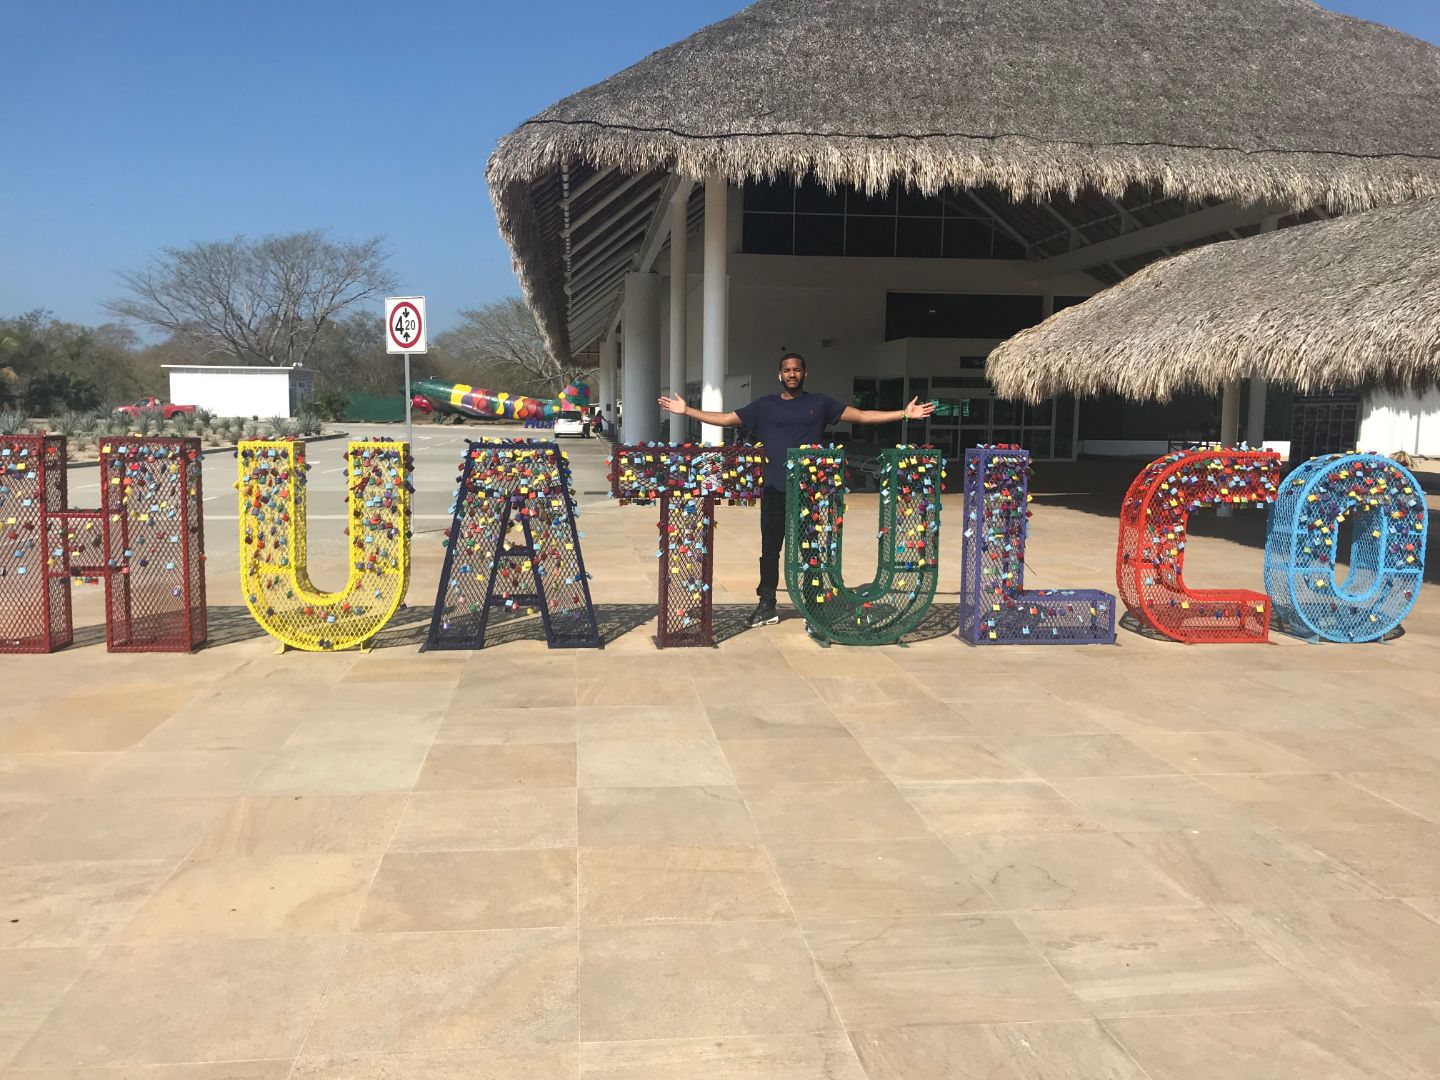 Johnson stands behind large metal letters that spell "HUATULCO"